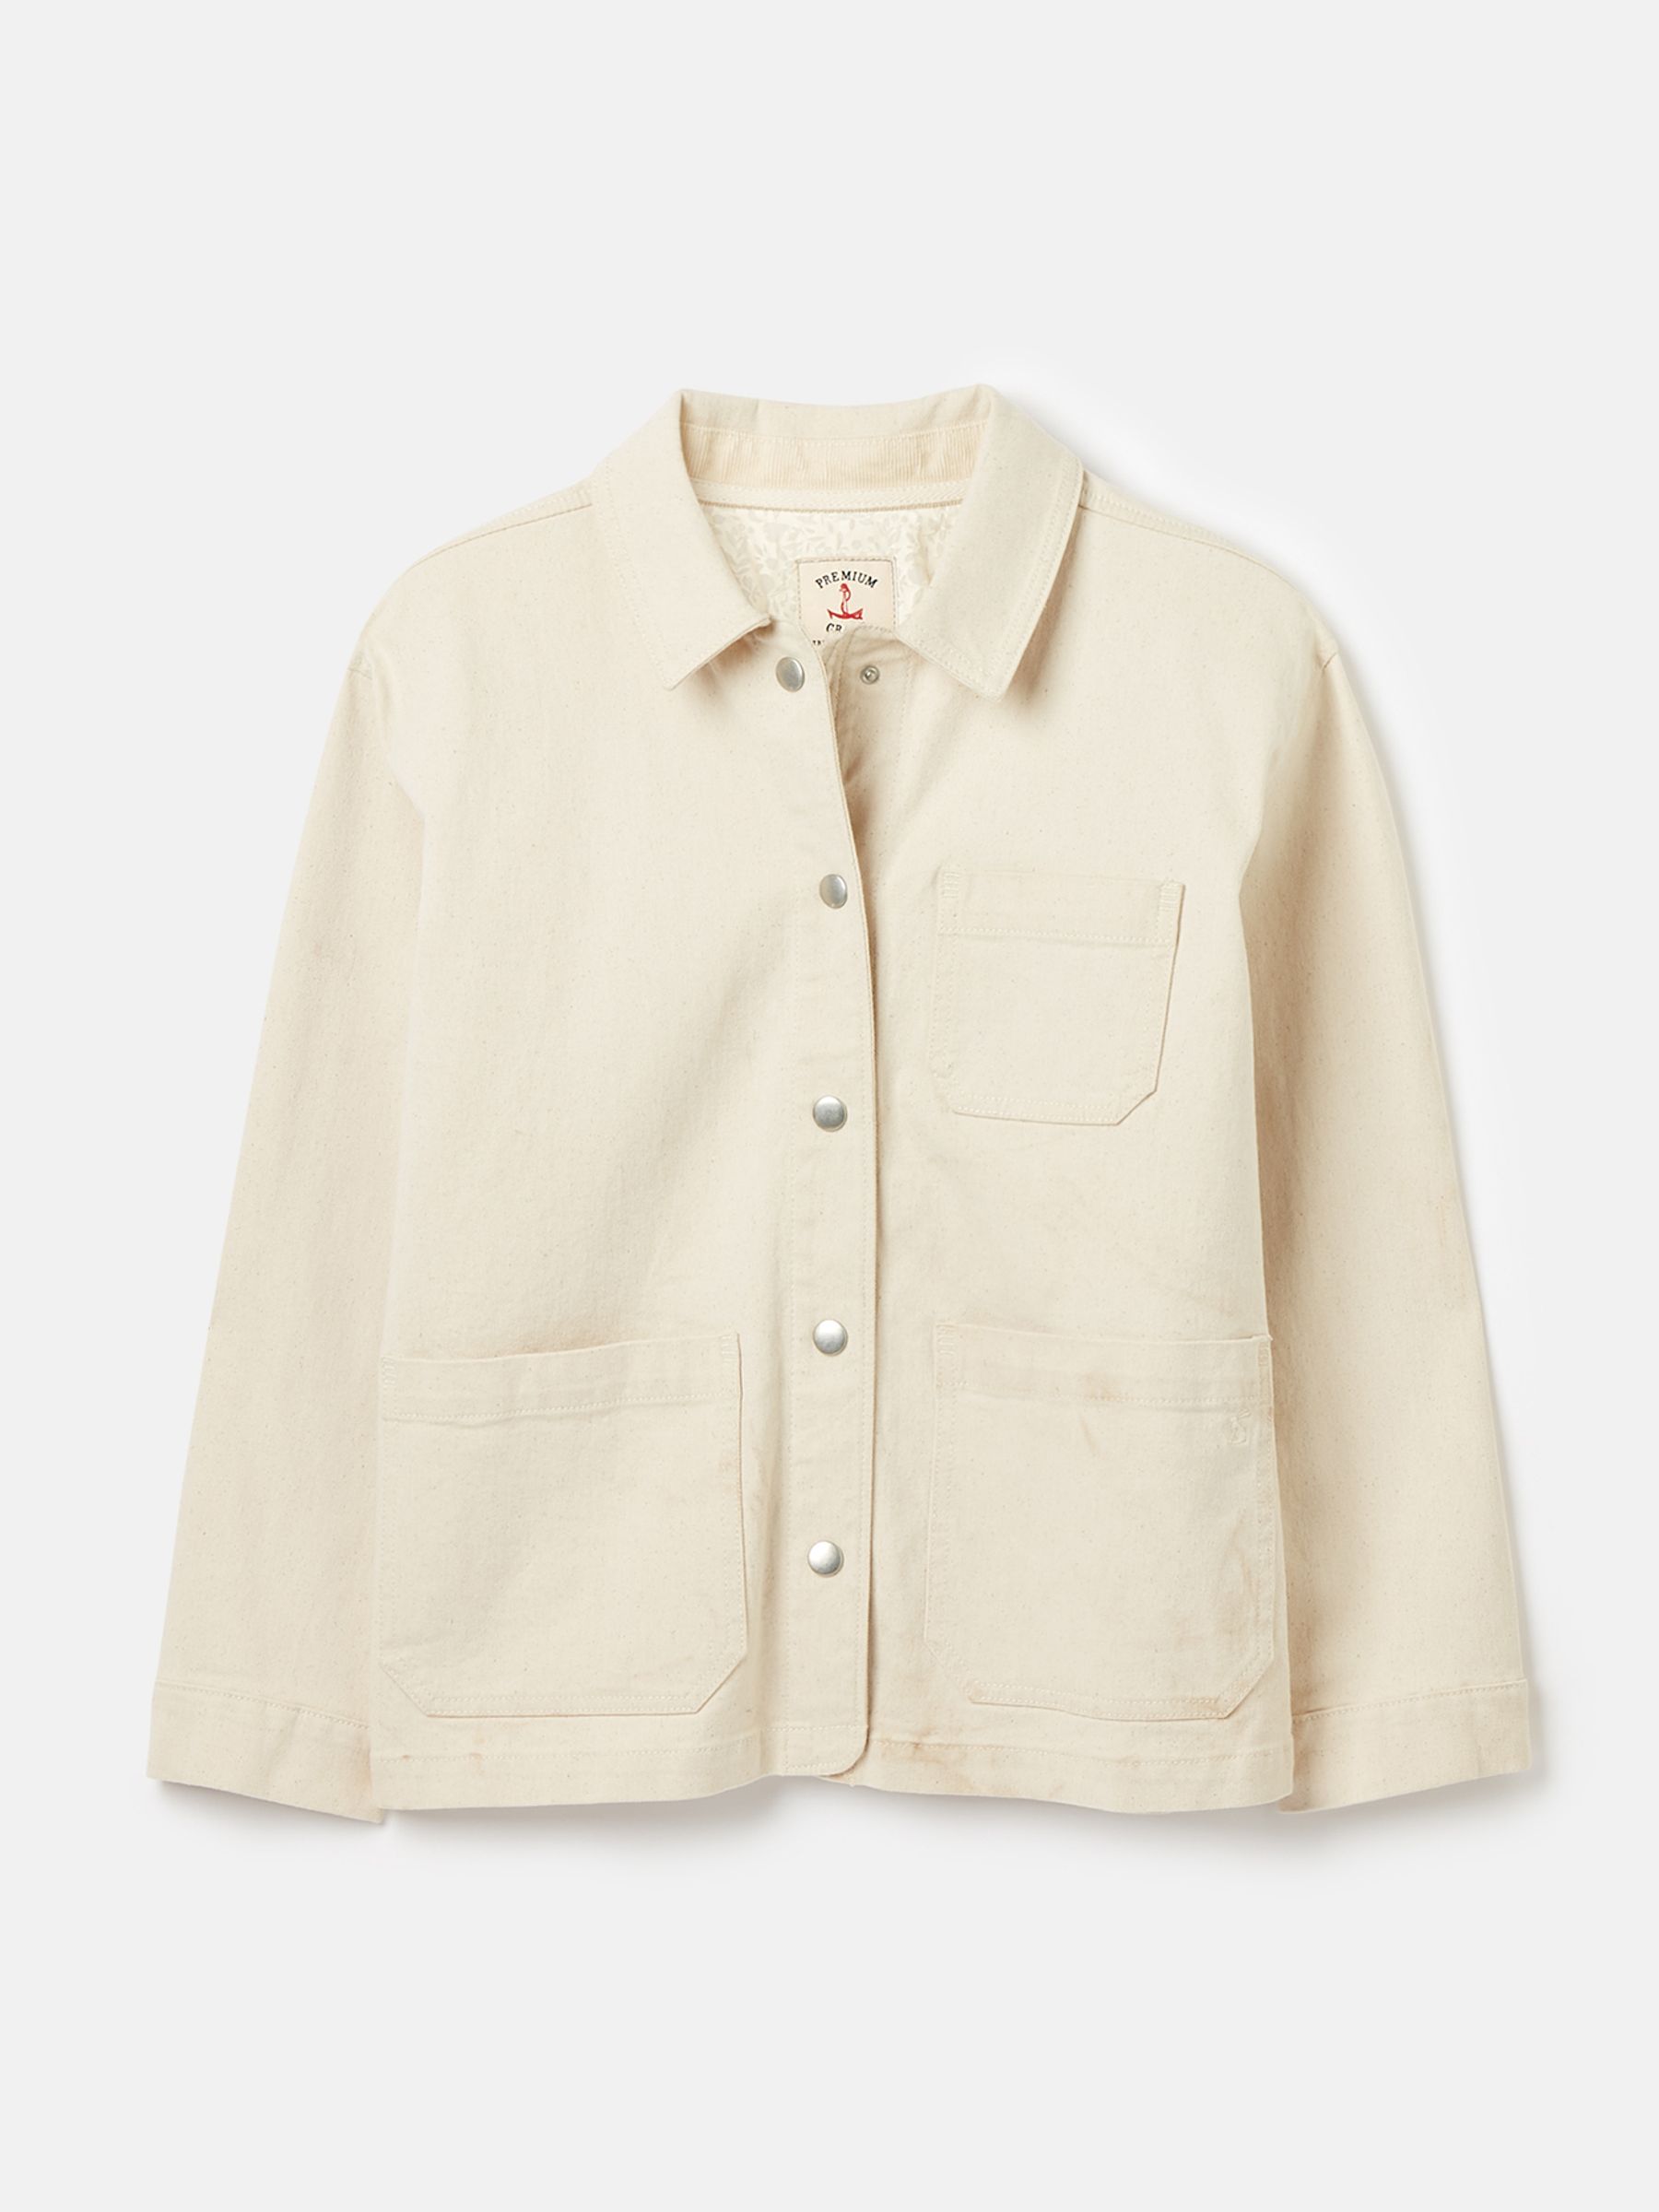 Buy Alice White Chore Jacket from the Joules online shop